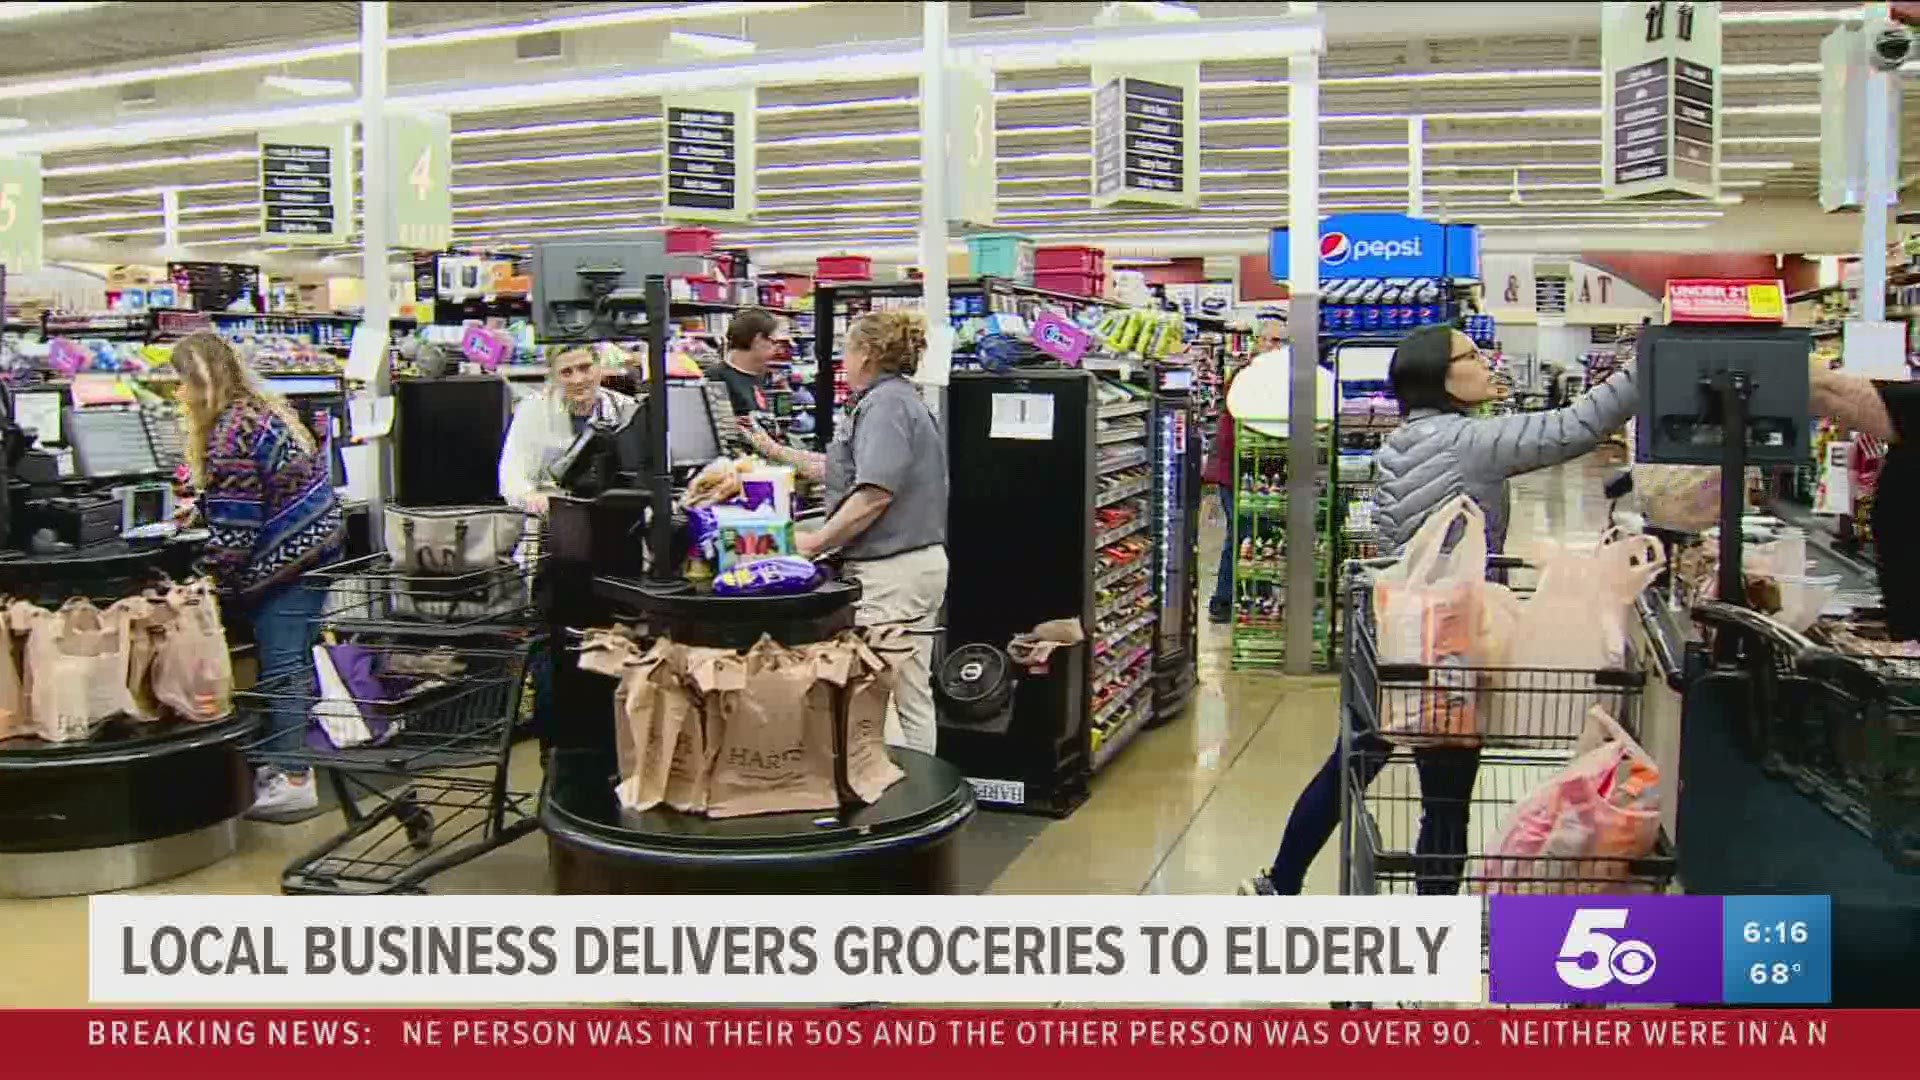 Local business delivers groceries to the elderly